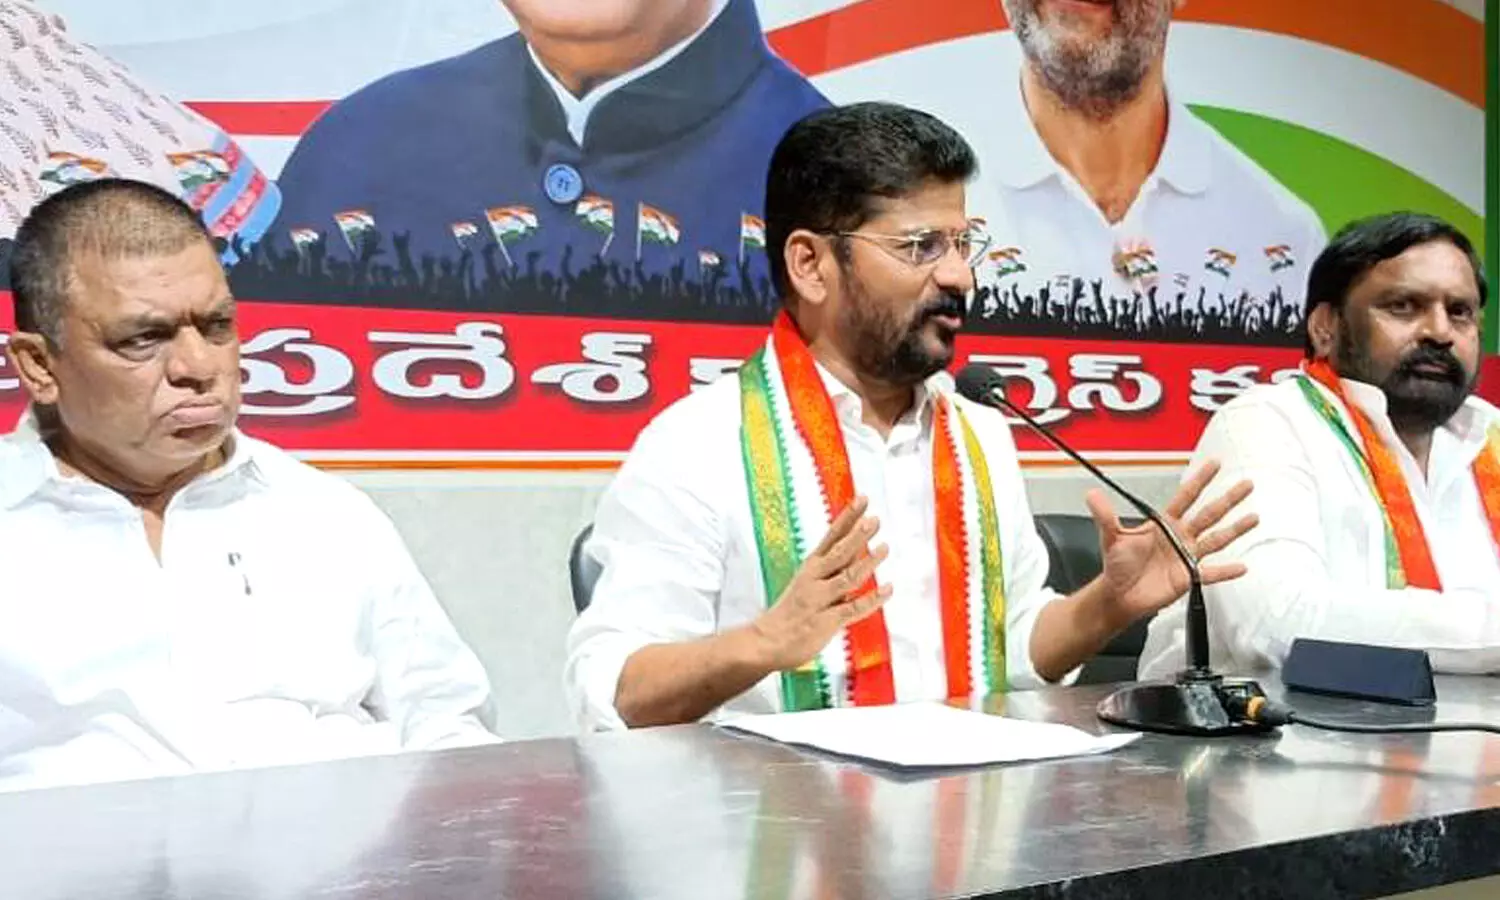 KCR’s open support to ‘One Nation One Election’ in 2018 indicates his pro-Modi stand: Revanth Reddy